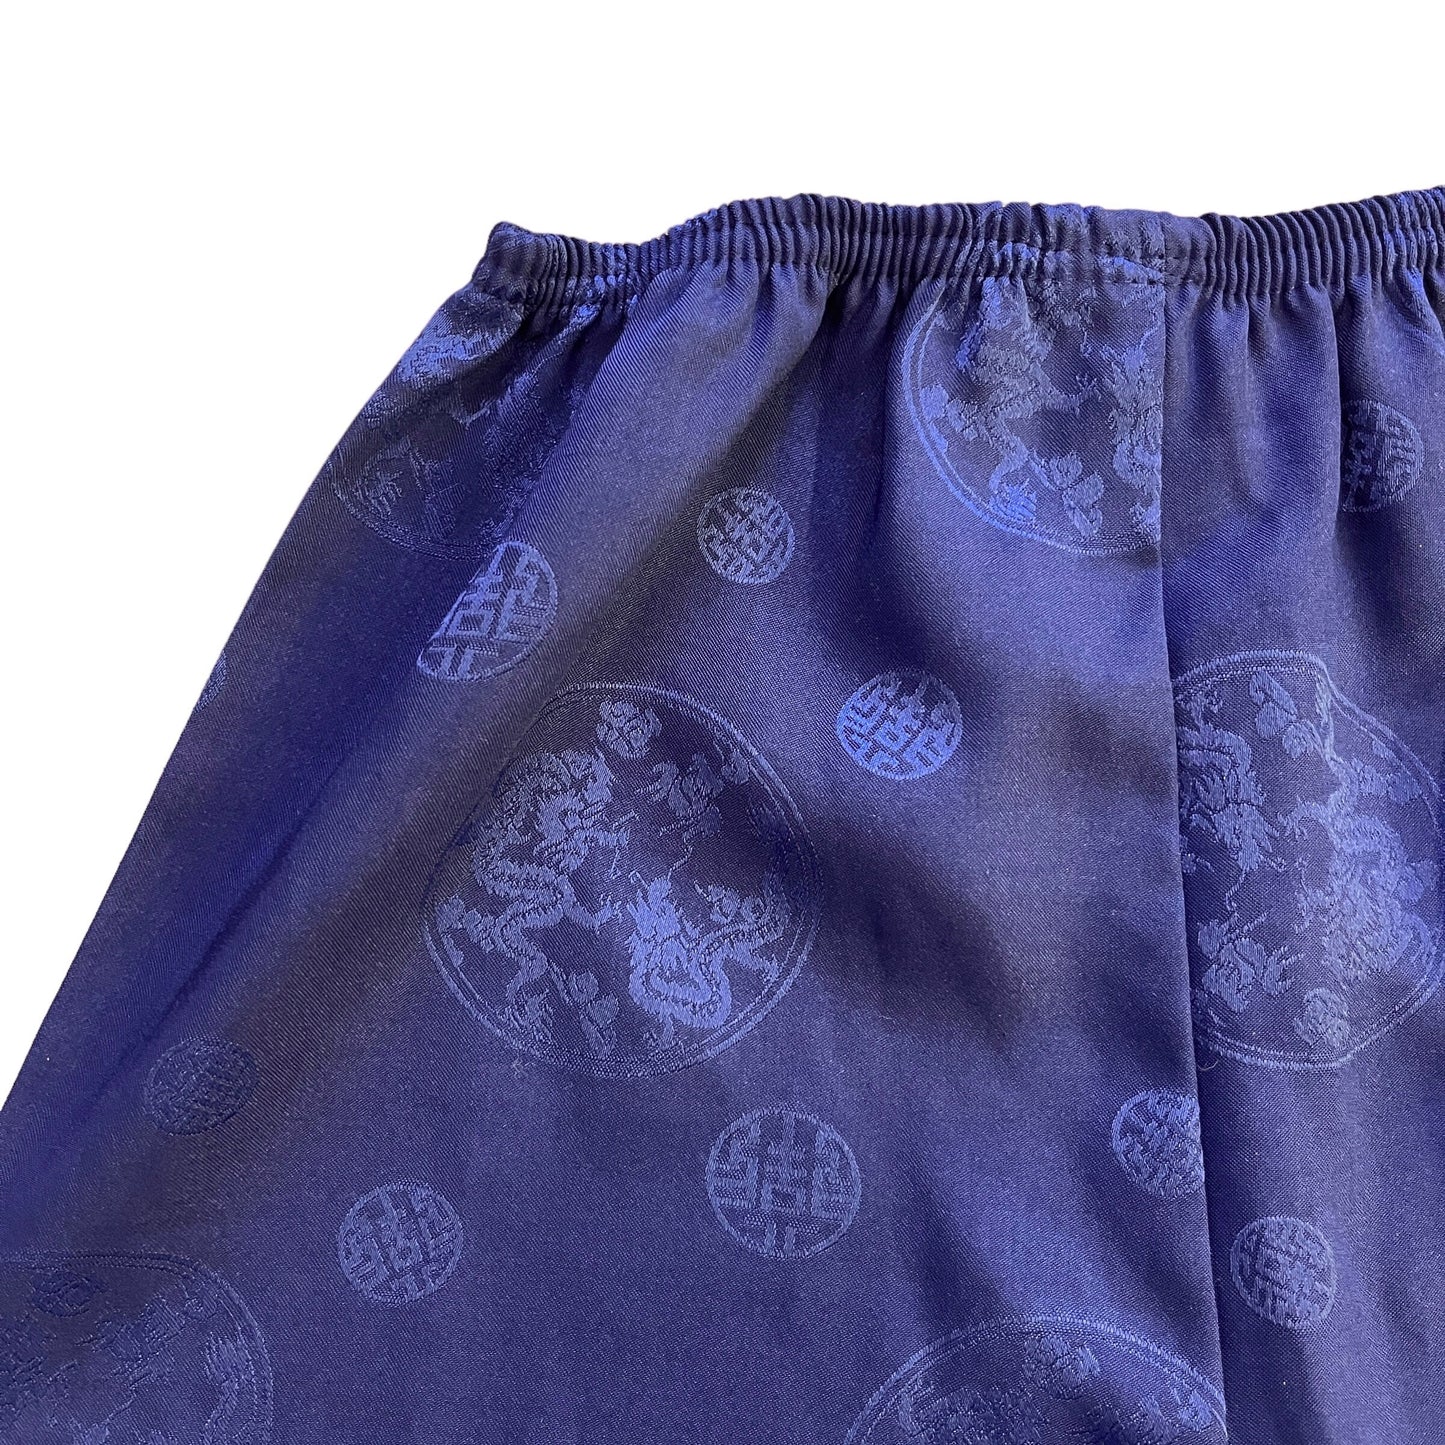 70s Navy Chinese Silky Bottoms / 6-8Y